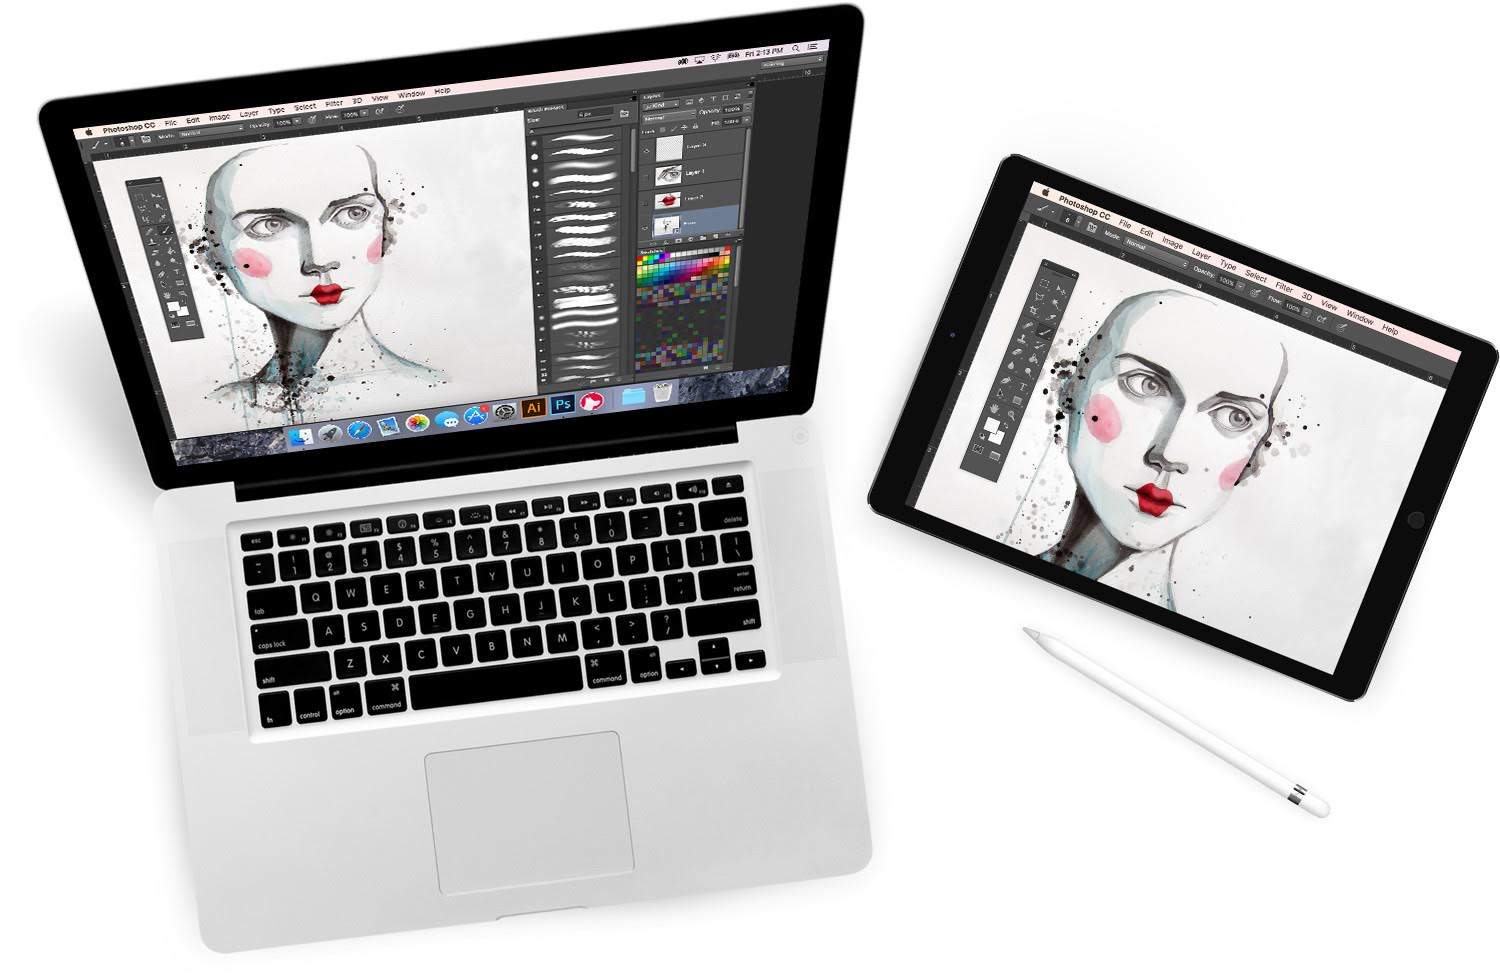 Astropad turns your iPad Pro into an amazing wireless